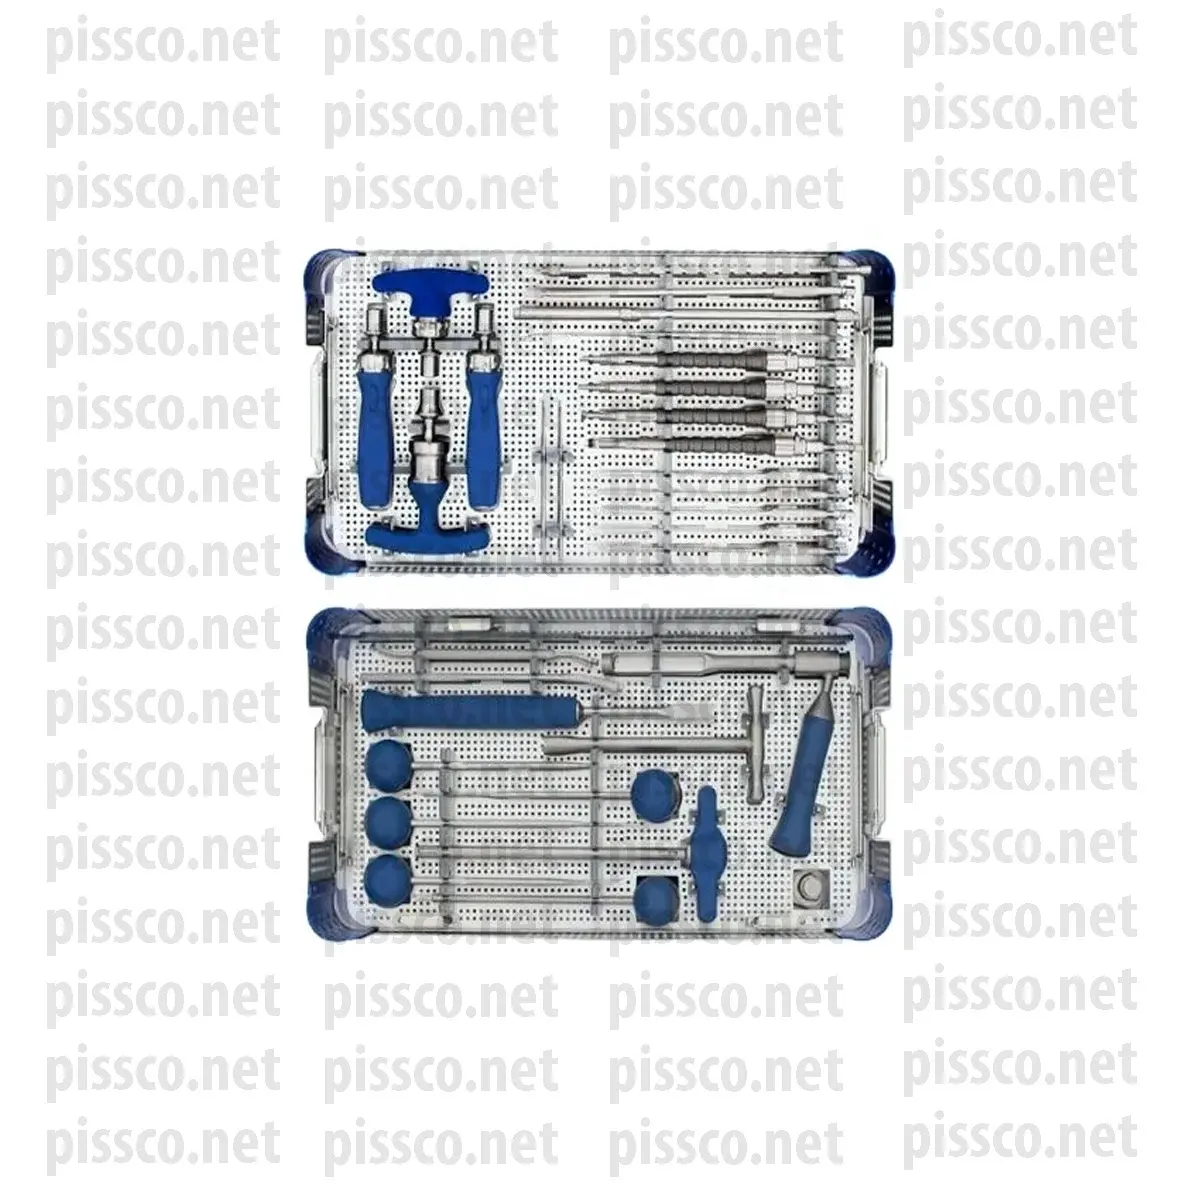 Spinal Surgical Instruments Set For Spinal Pedicle Spinal Fixation Instrument System Customized By Pissco